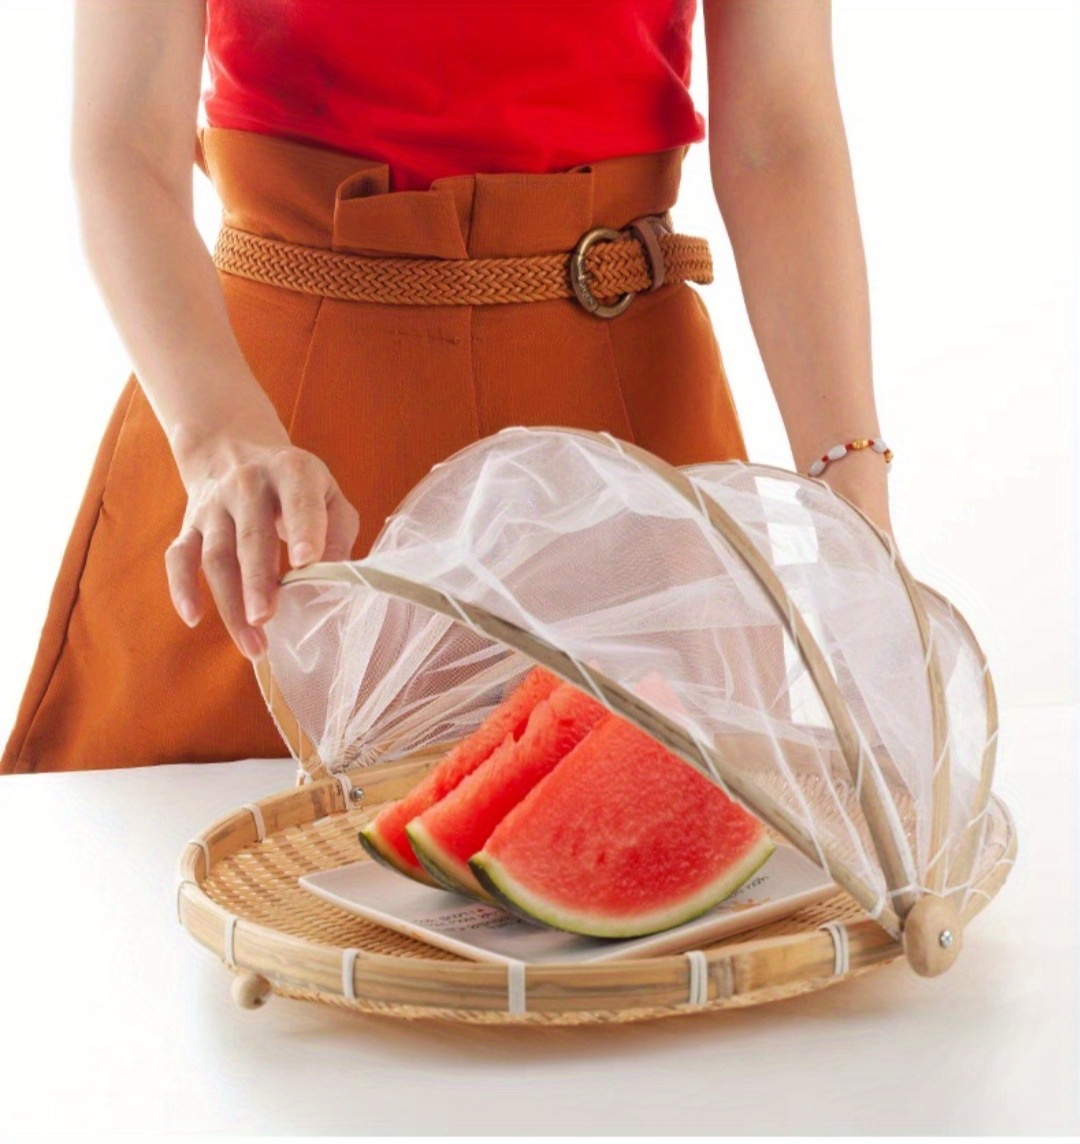 Bamboo Woven Insect-Proof Basket with Mesh Cover Anti-Fly Storage